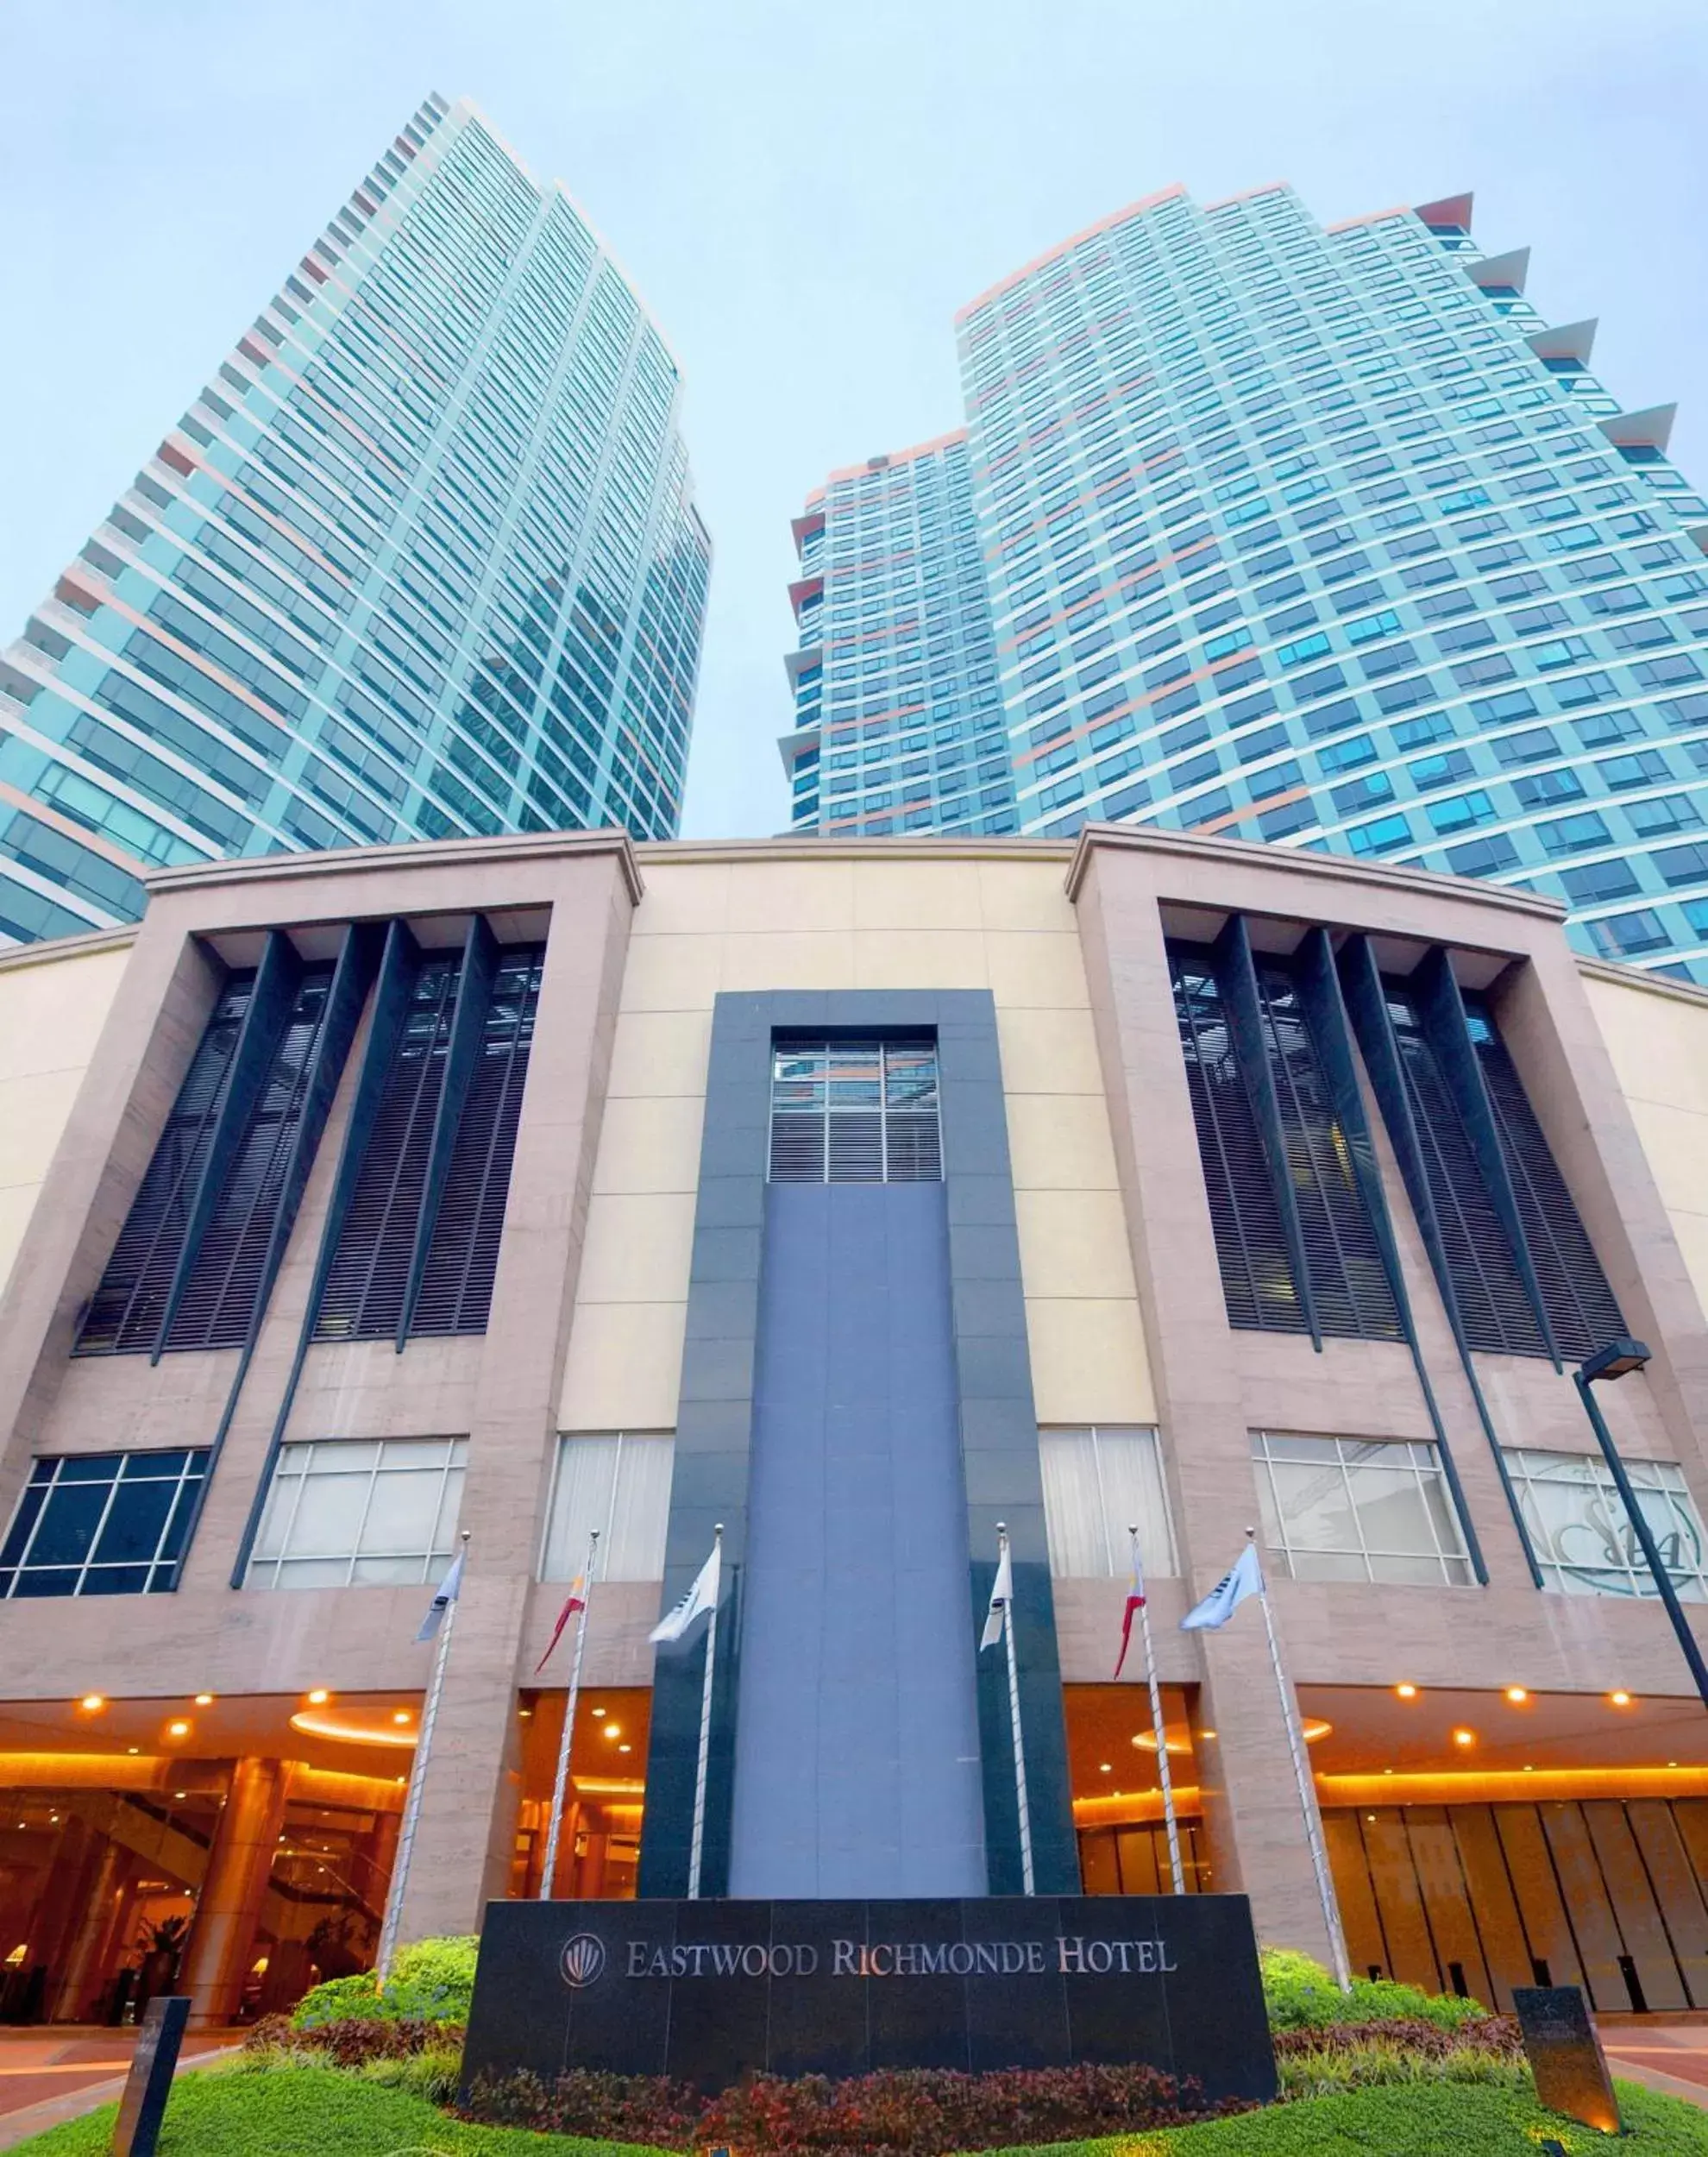 Property Building in Eastwood Richmonde Hotel